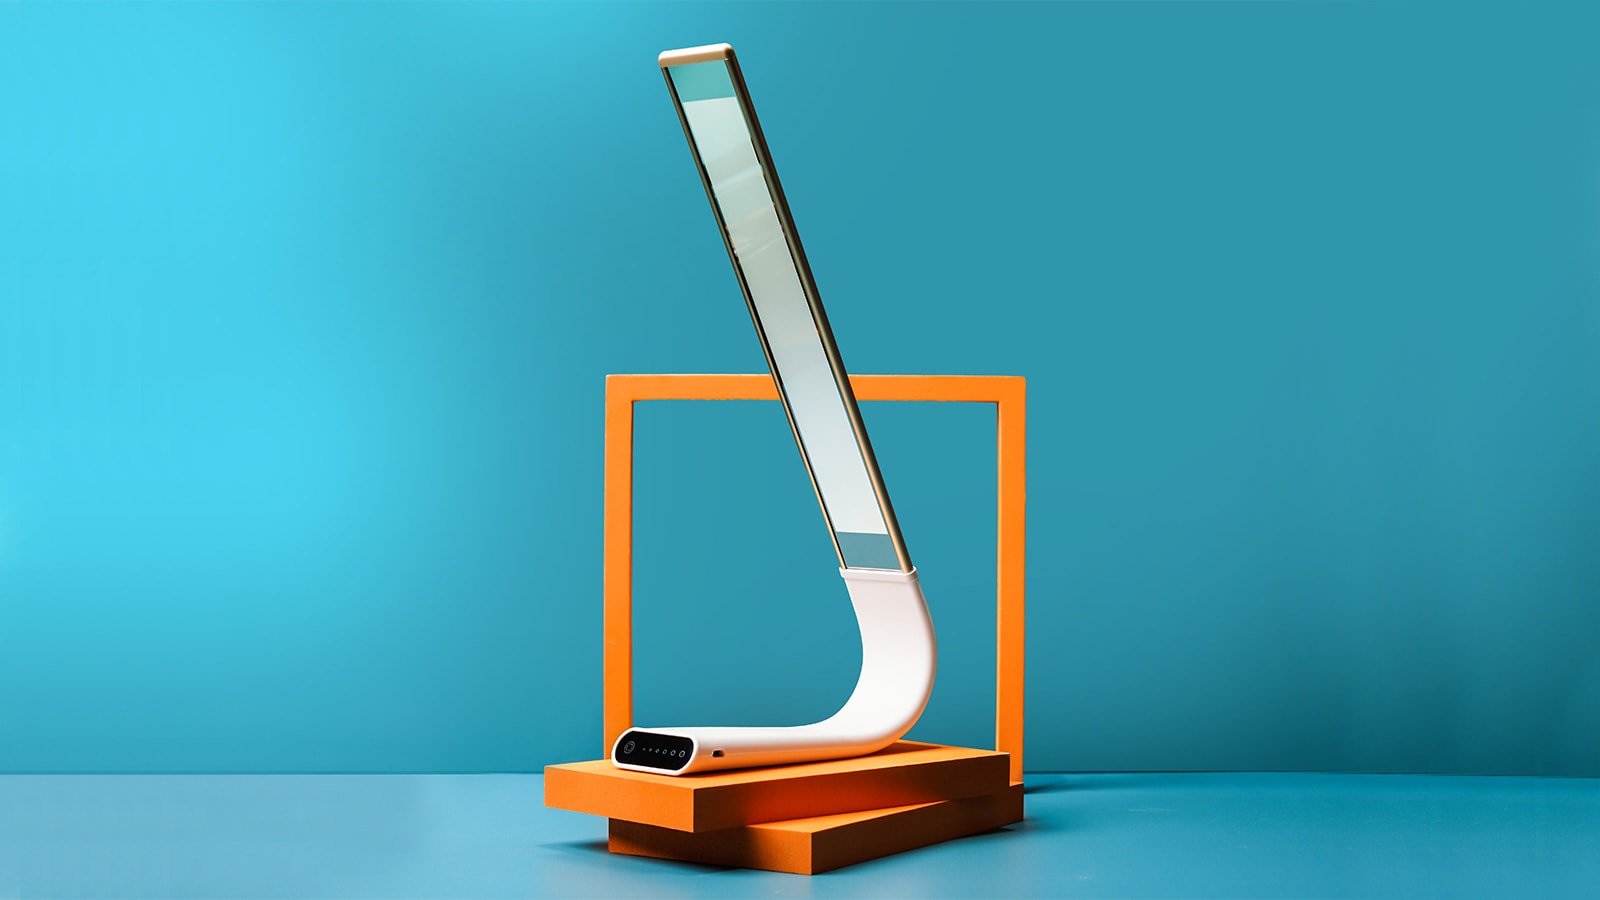 Ocushield Oculamp desk lamp with low blue light prevents eye strain & includes 3 color settings